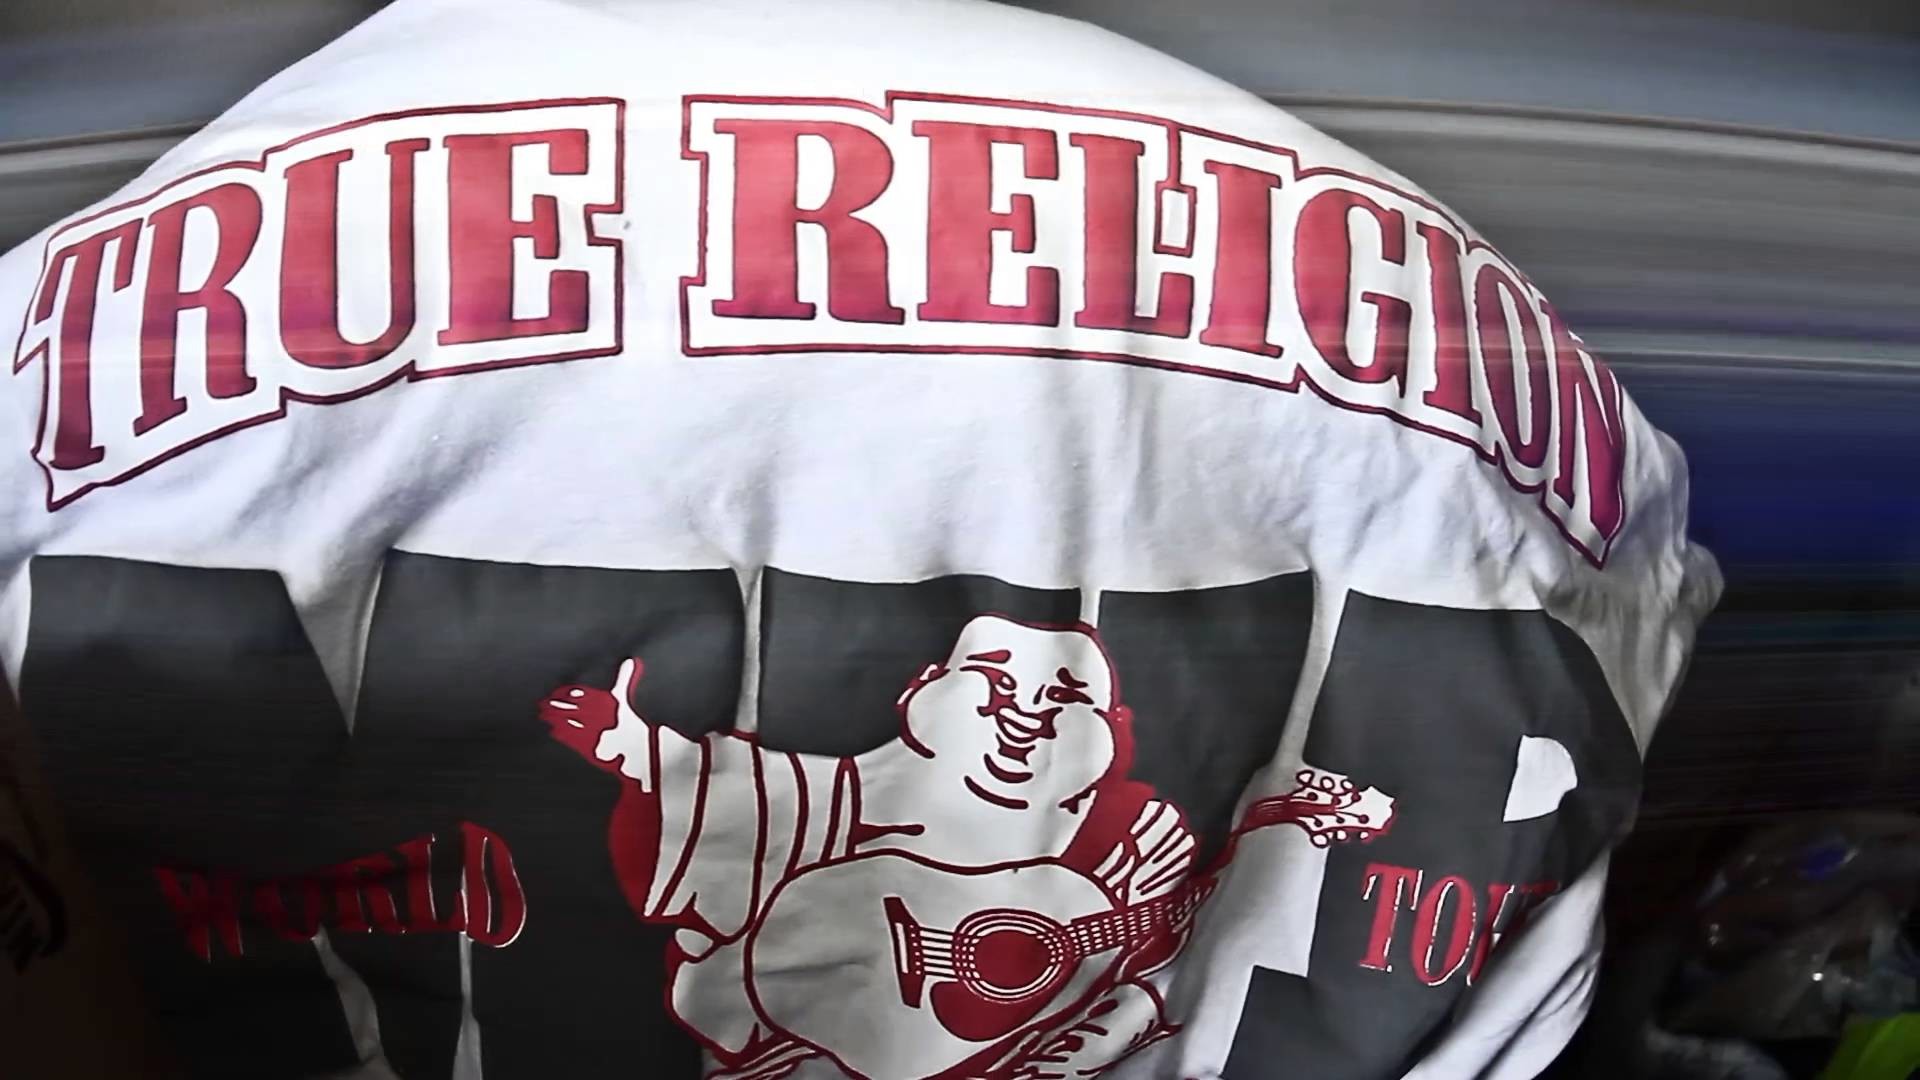 Want to ball out at the True Religion Store? Go to StacksAMilli.com –  YouTube